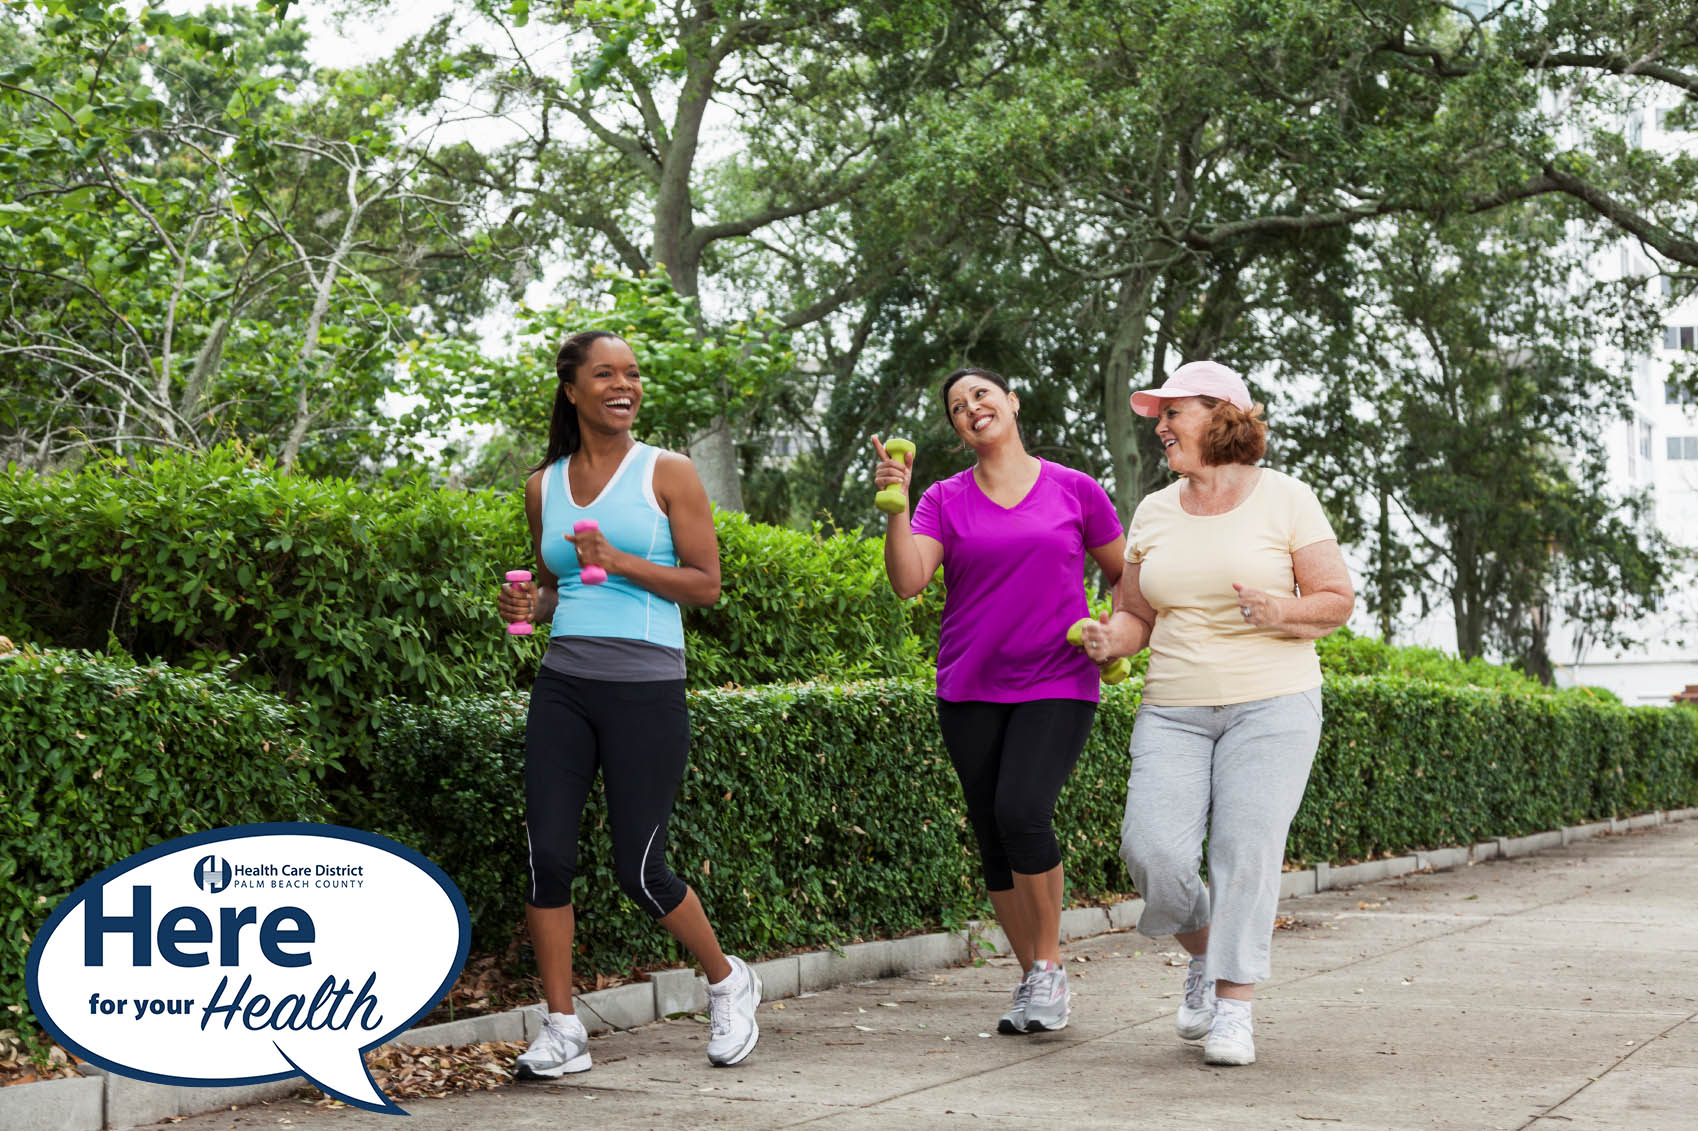 Three women having a happy conversation while jogging with dumbbells